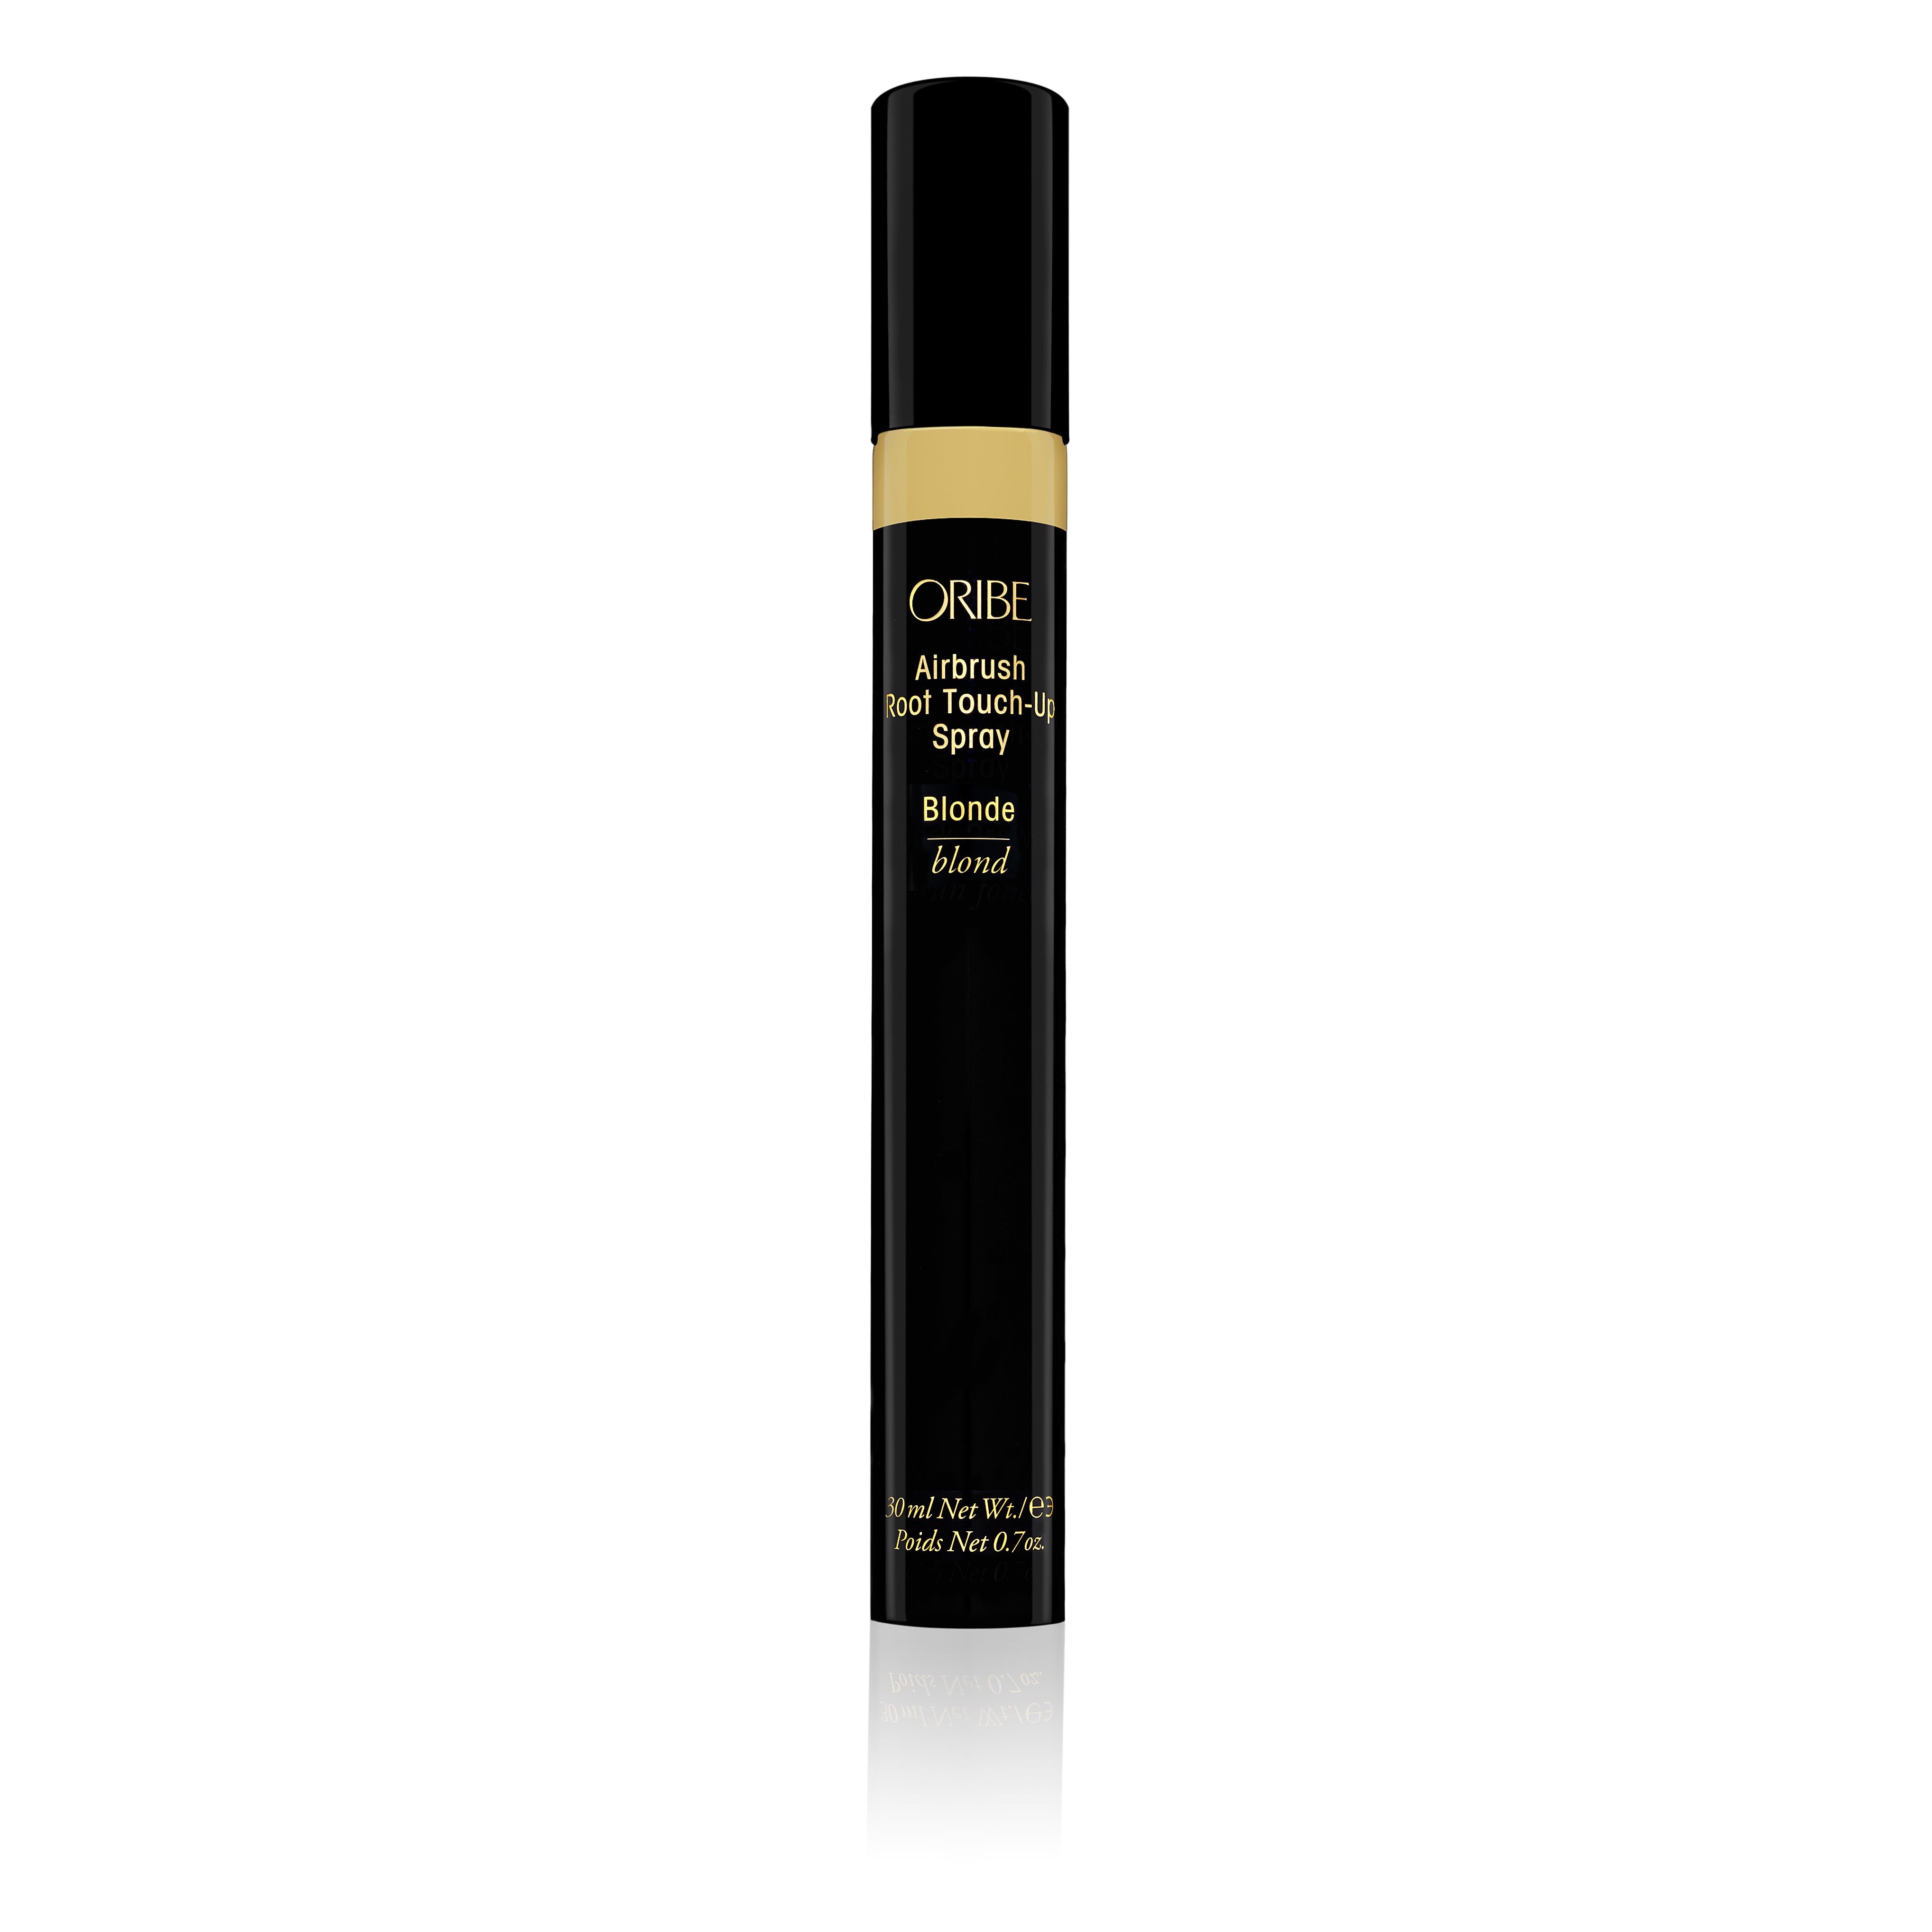 Airbrush Root Touch-Up Spray by Oribe - Blonde